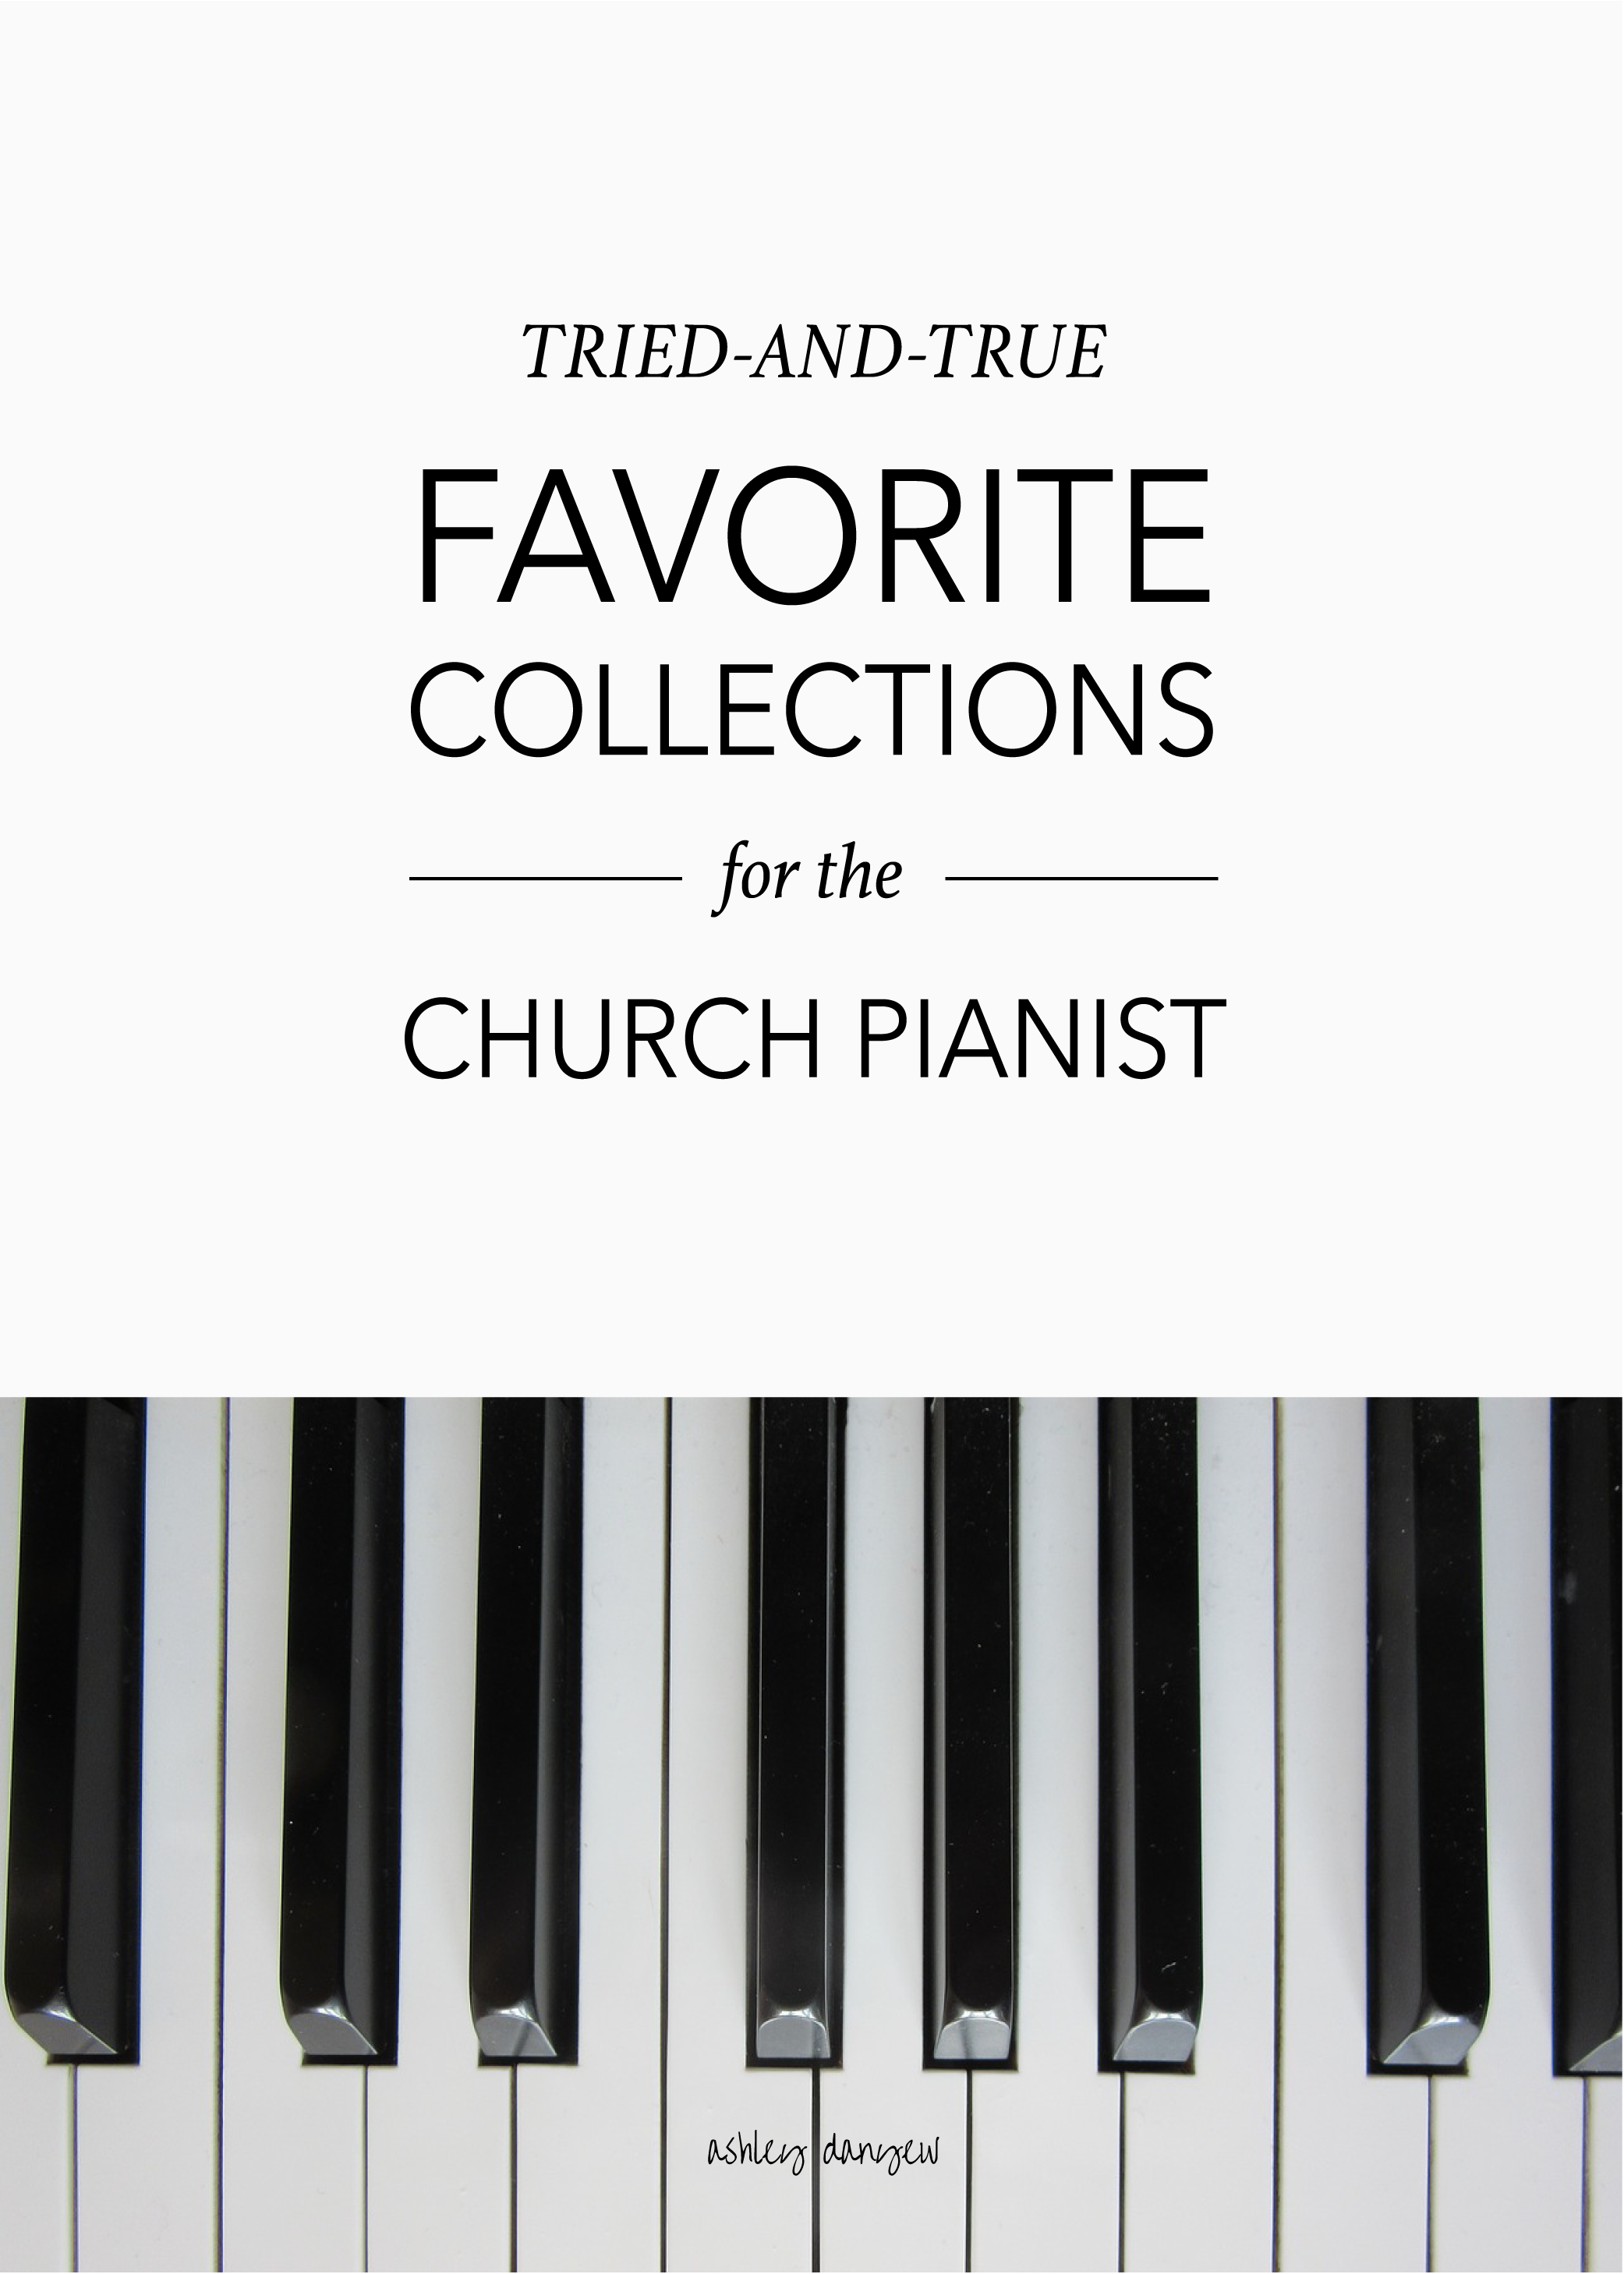 Copy of Tried-and-True Favorite Collections for the Church Pianist